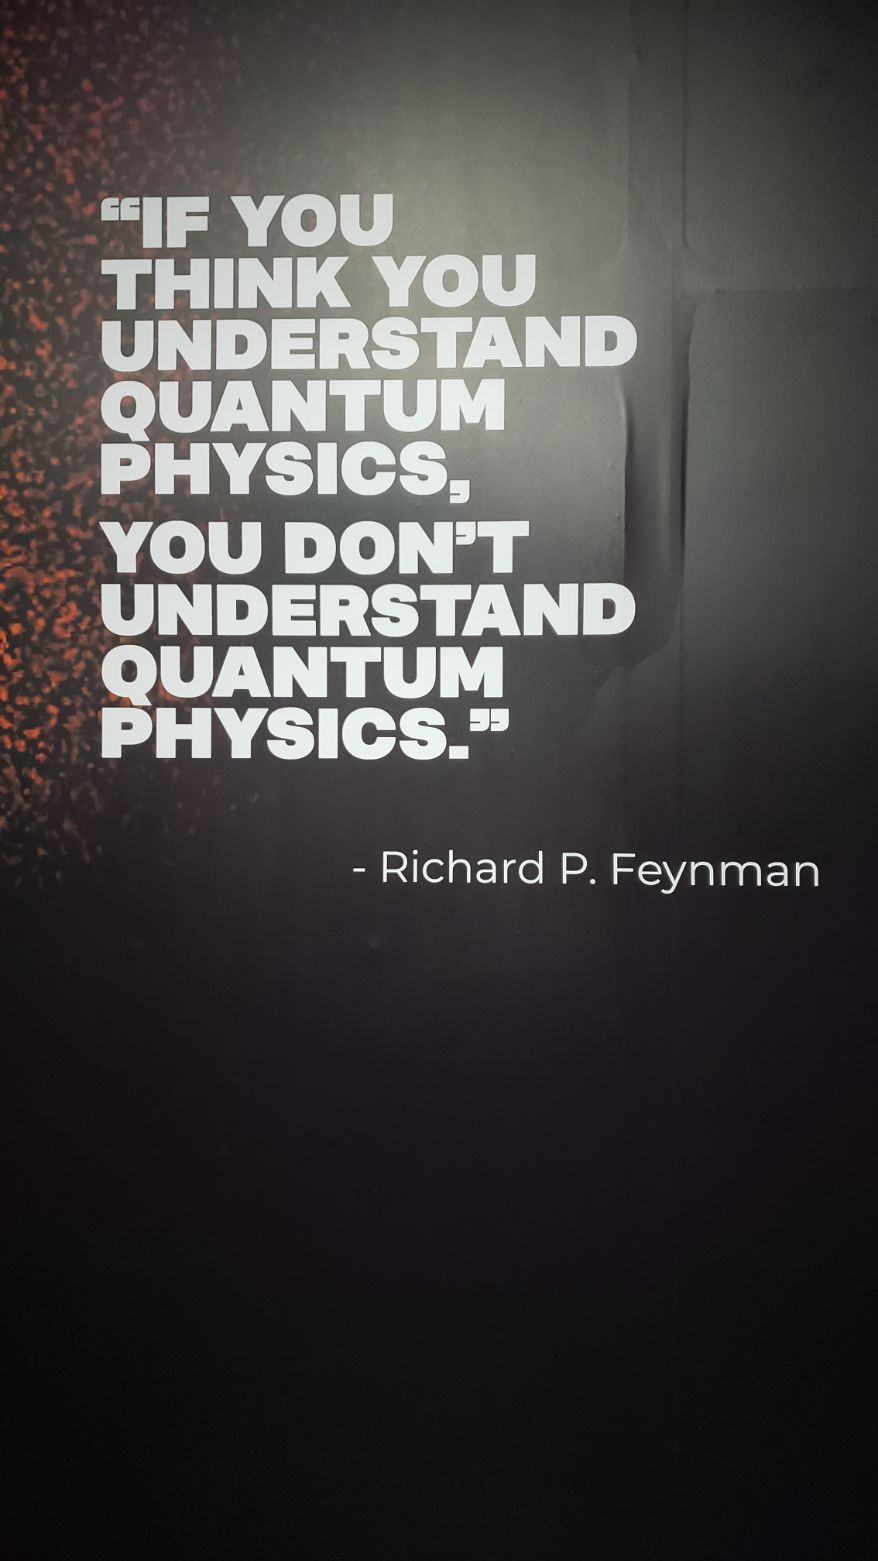 Photo of white text on a black background. It reads "If you think you understand quantum physics, you don't understand quantum physics." Richard P. Feynman